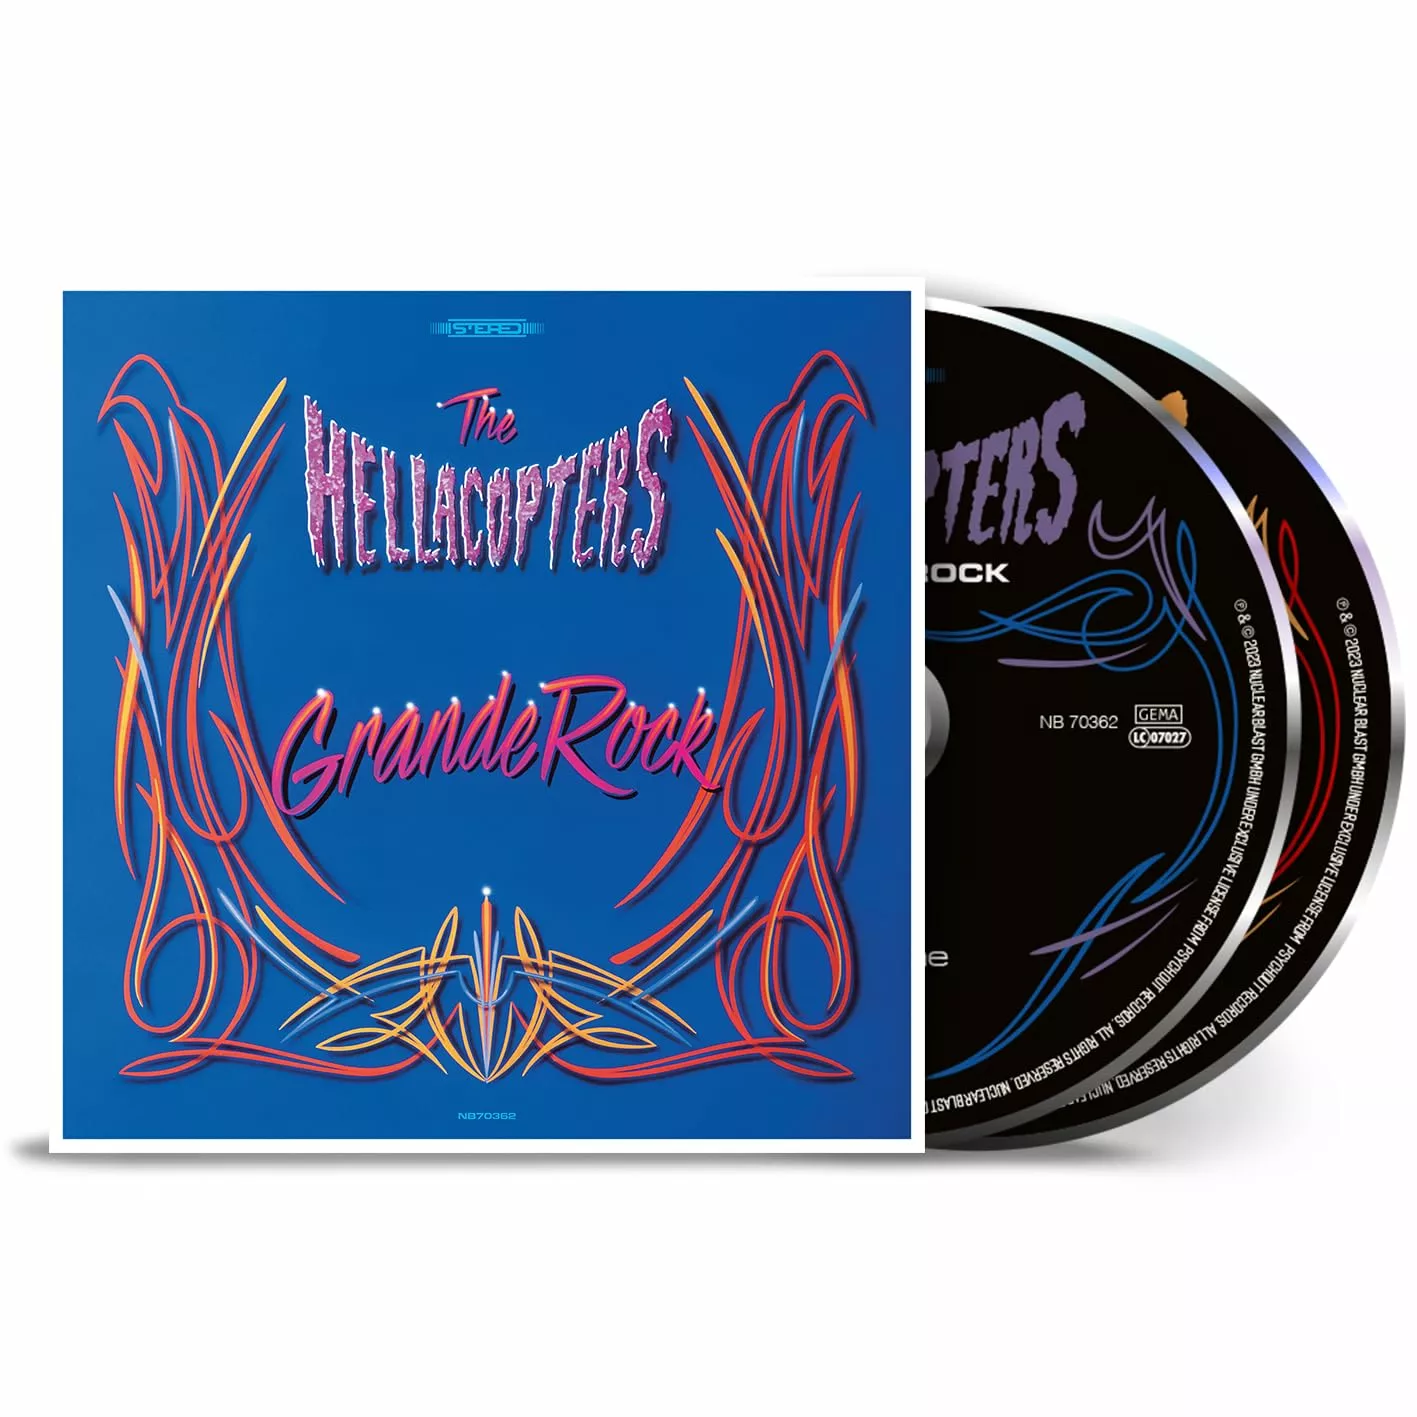 THE HELLACOPTERS - Grande Rock Revisited [2CD]